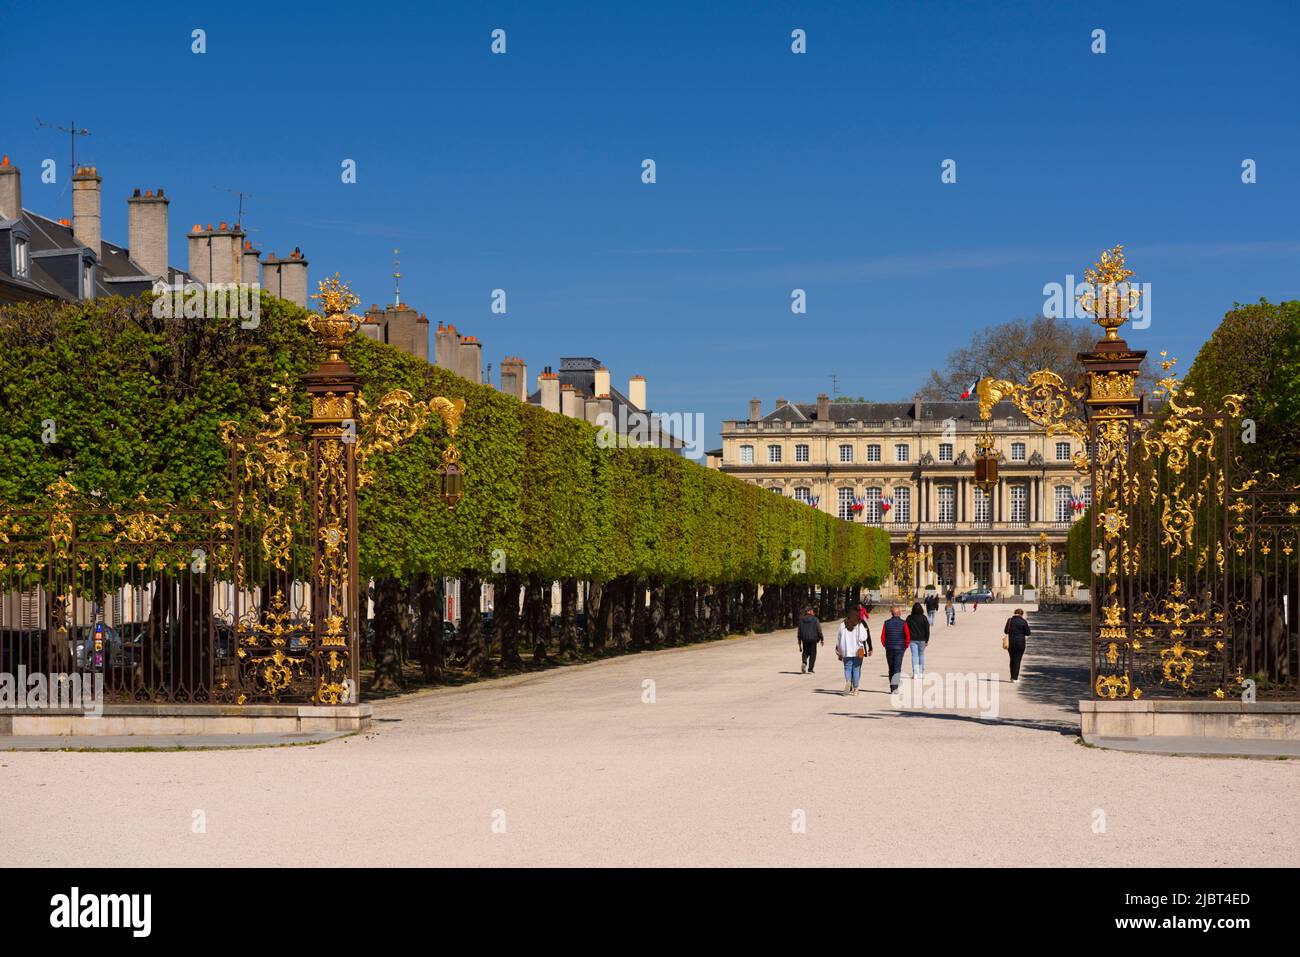 France, Meurthe et Moselle, Nancy, railings by Jean Lamour and facade of former Palais du Gouvernement by architect Here along Place de la Carriere (Carriere square) next to Stanislas square (former royal square) built by Stanislas Leszczynski, King of Poland and last Duke of Lorraine in the 18th century, listed as World Heritage by UNESCO, railings and ironworks by Jean Lamour Stock Photo